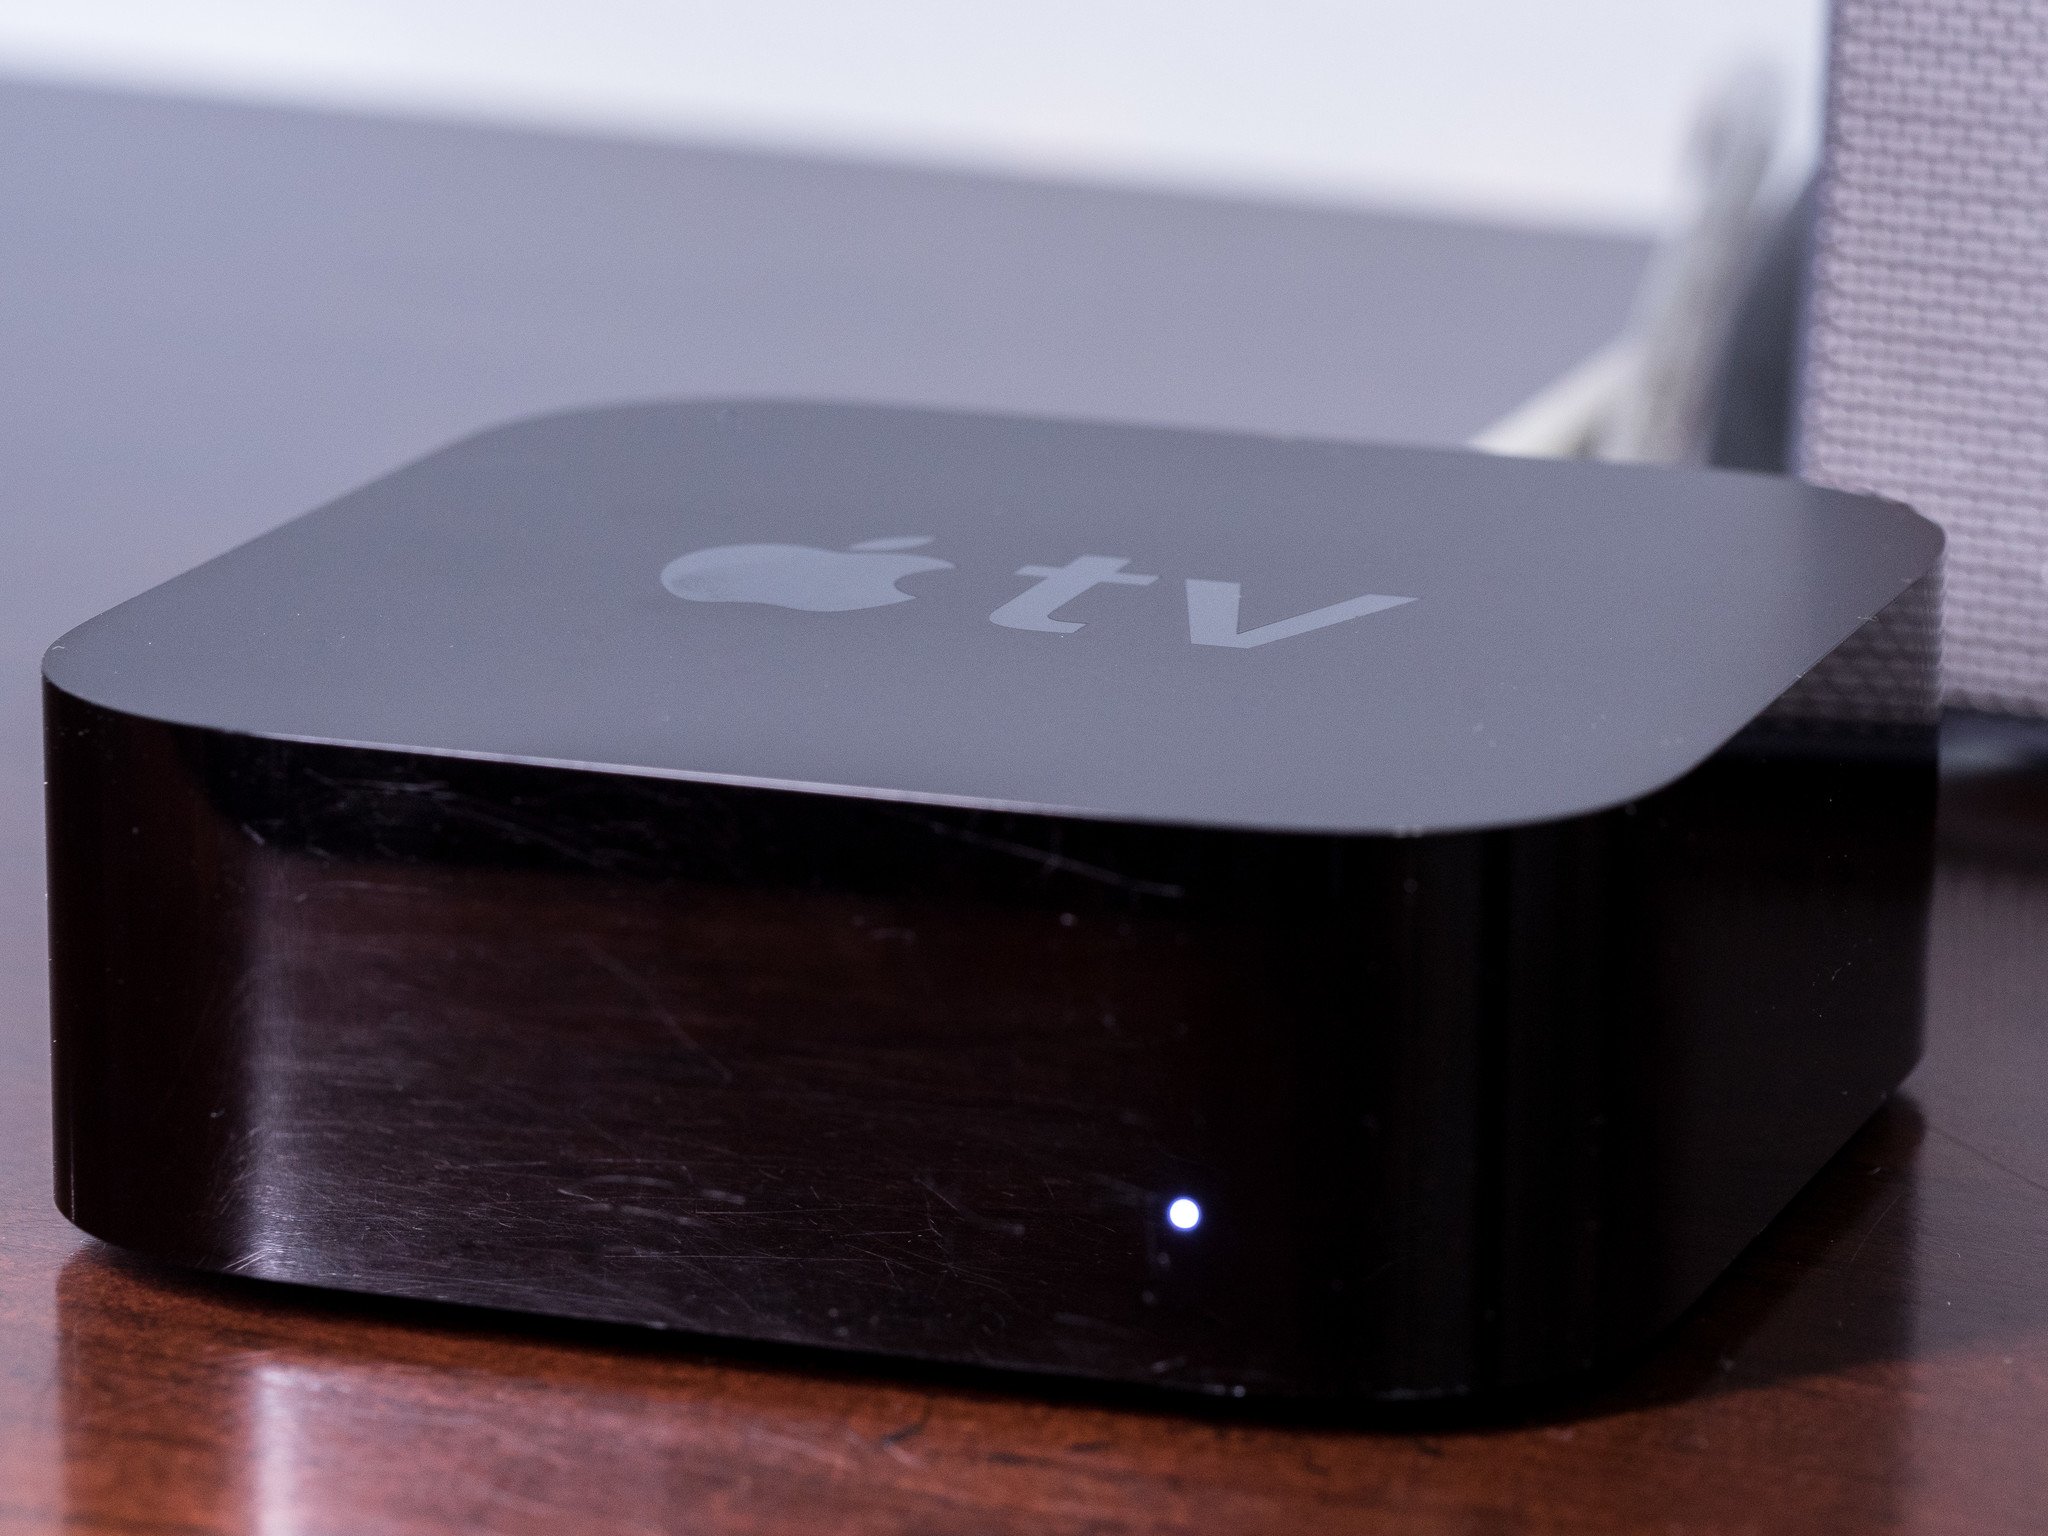 Tv Providers That Work With Apple Single Sign On What To Watch